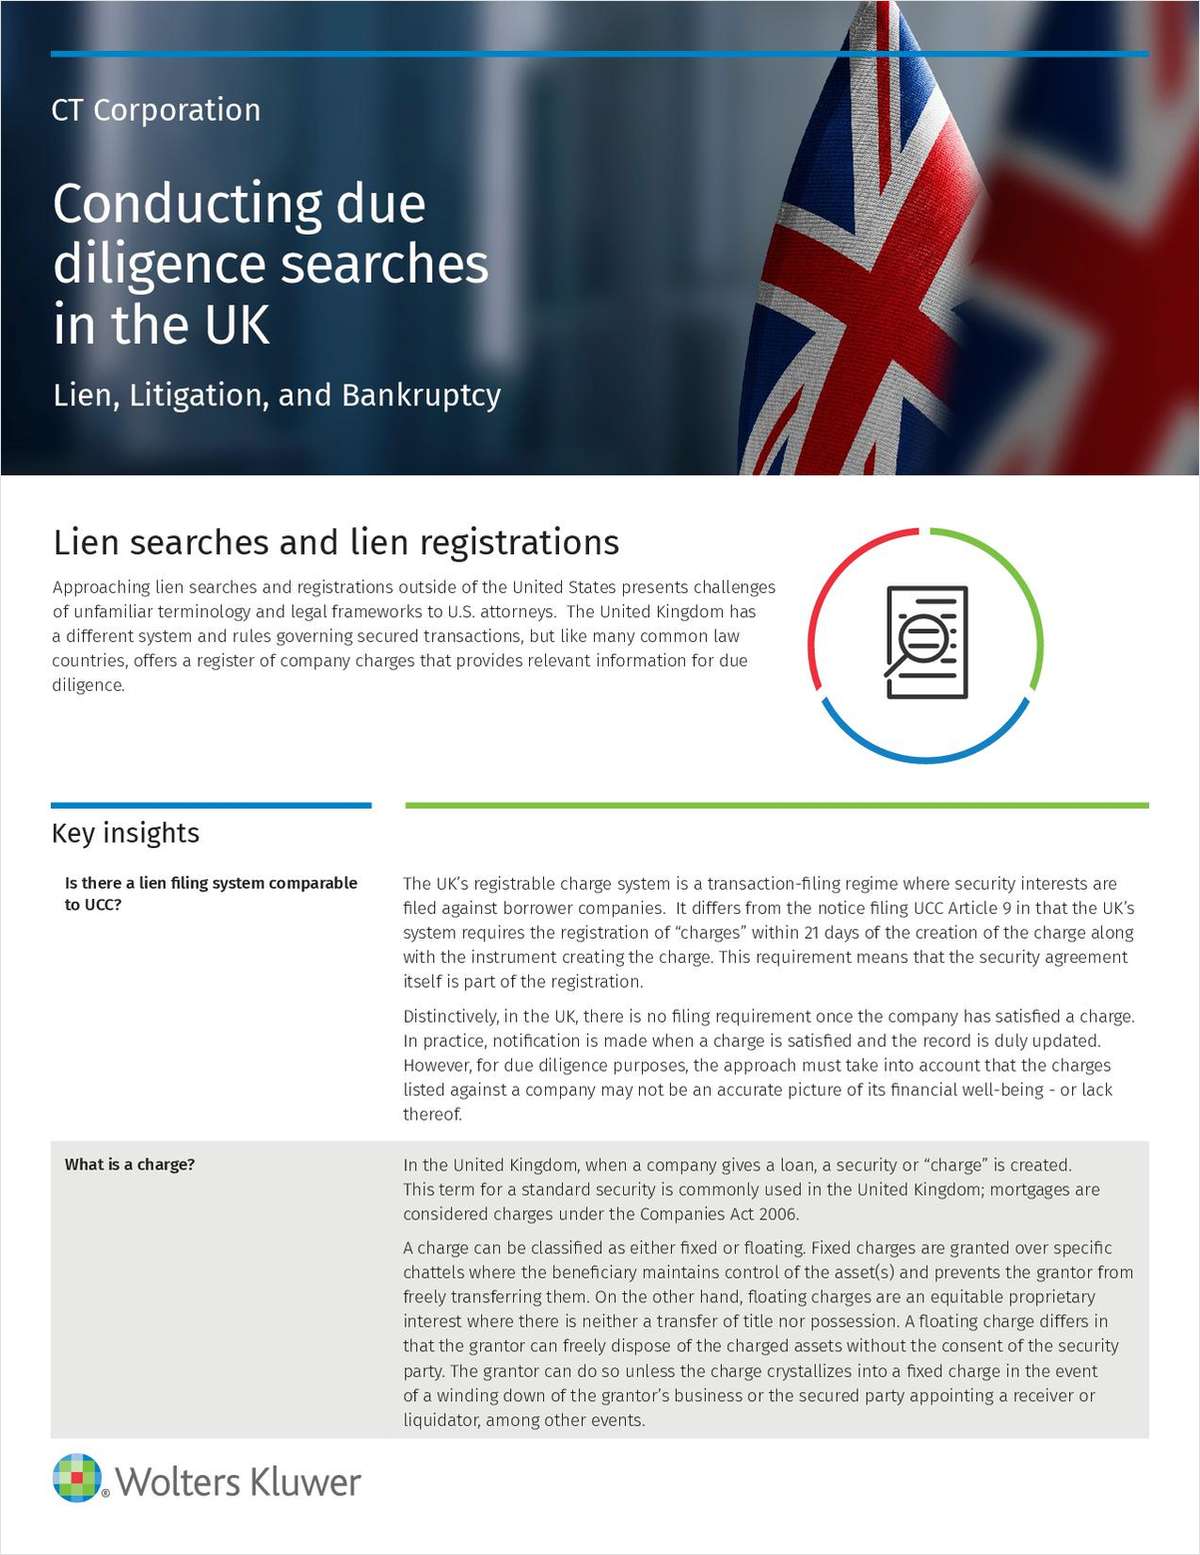 This guide provides a quick overview of common questions about conducting lien, litigation, and bankruptcy searches in the UK, including common terminology used, and more.